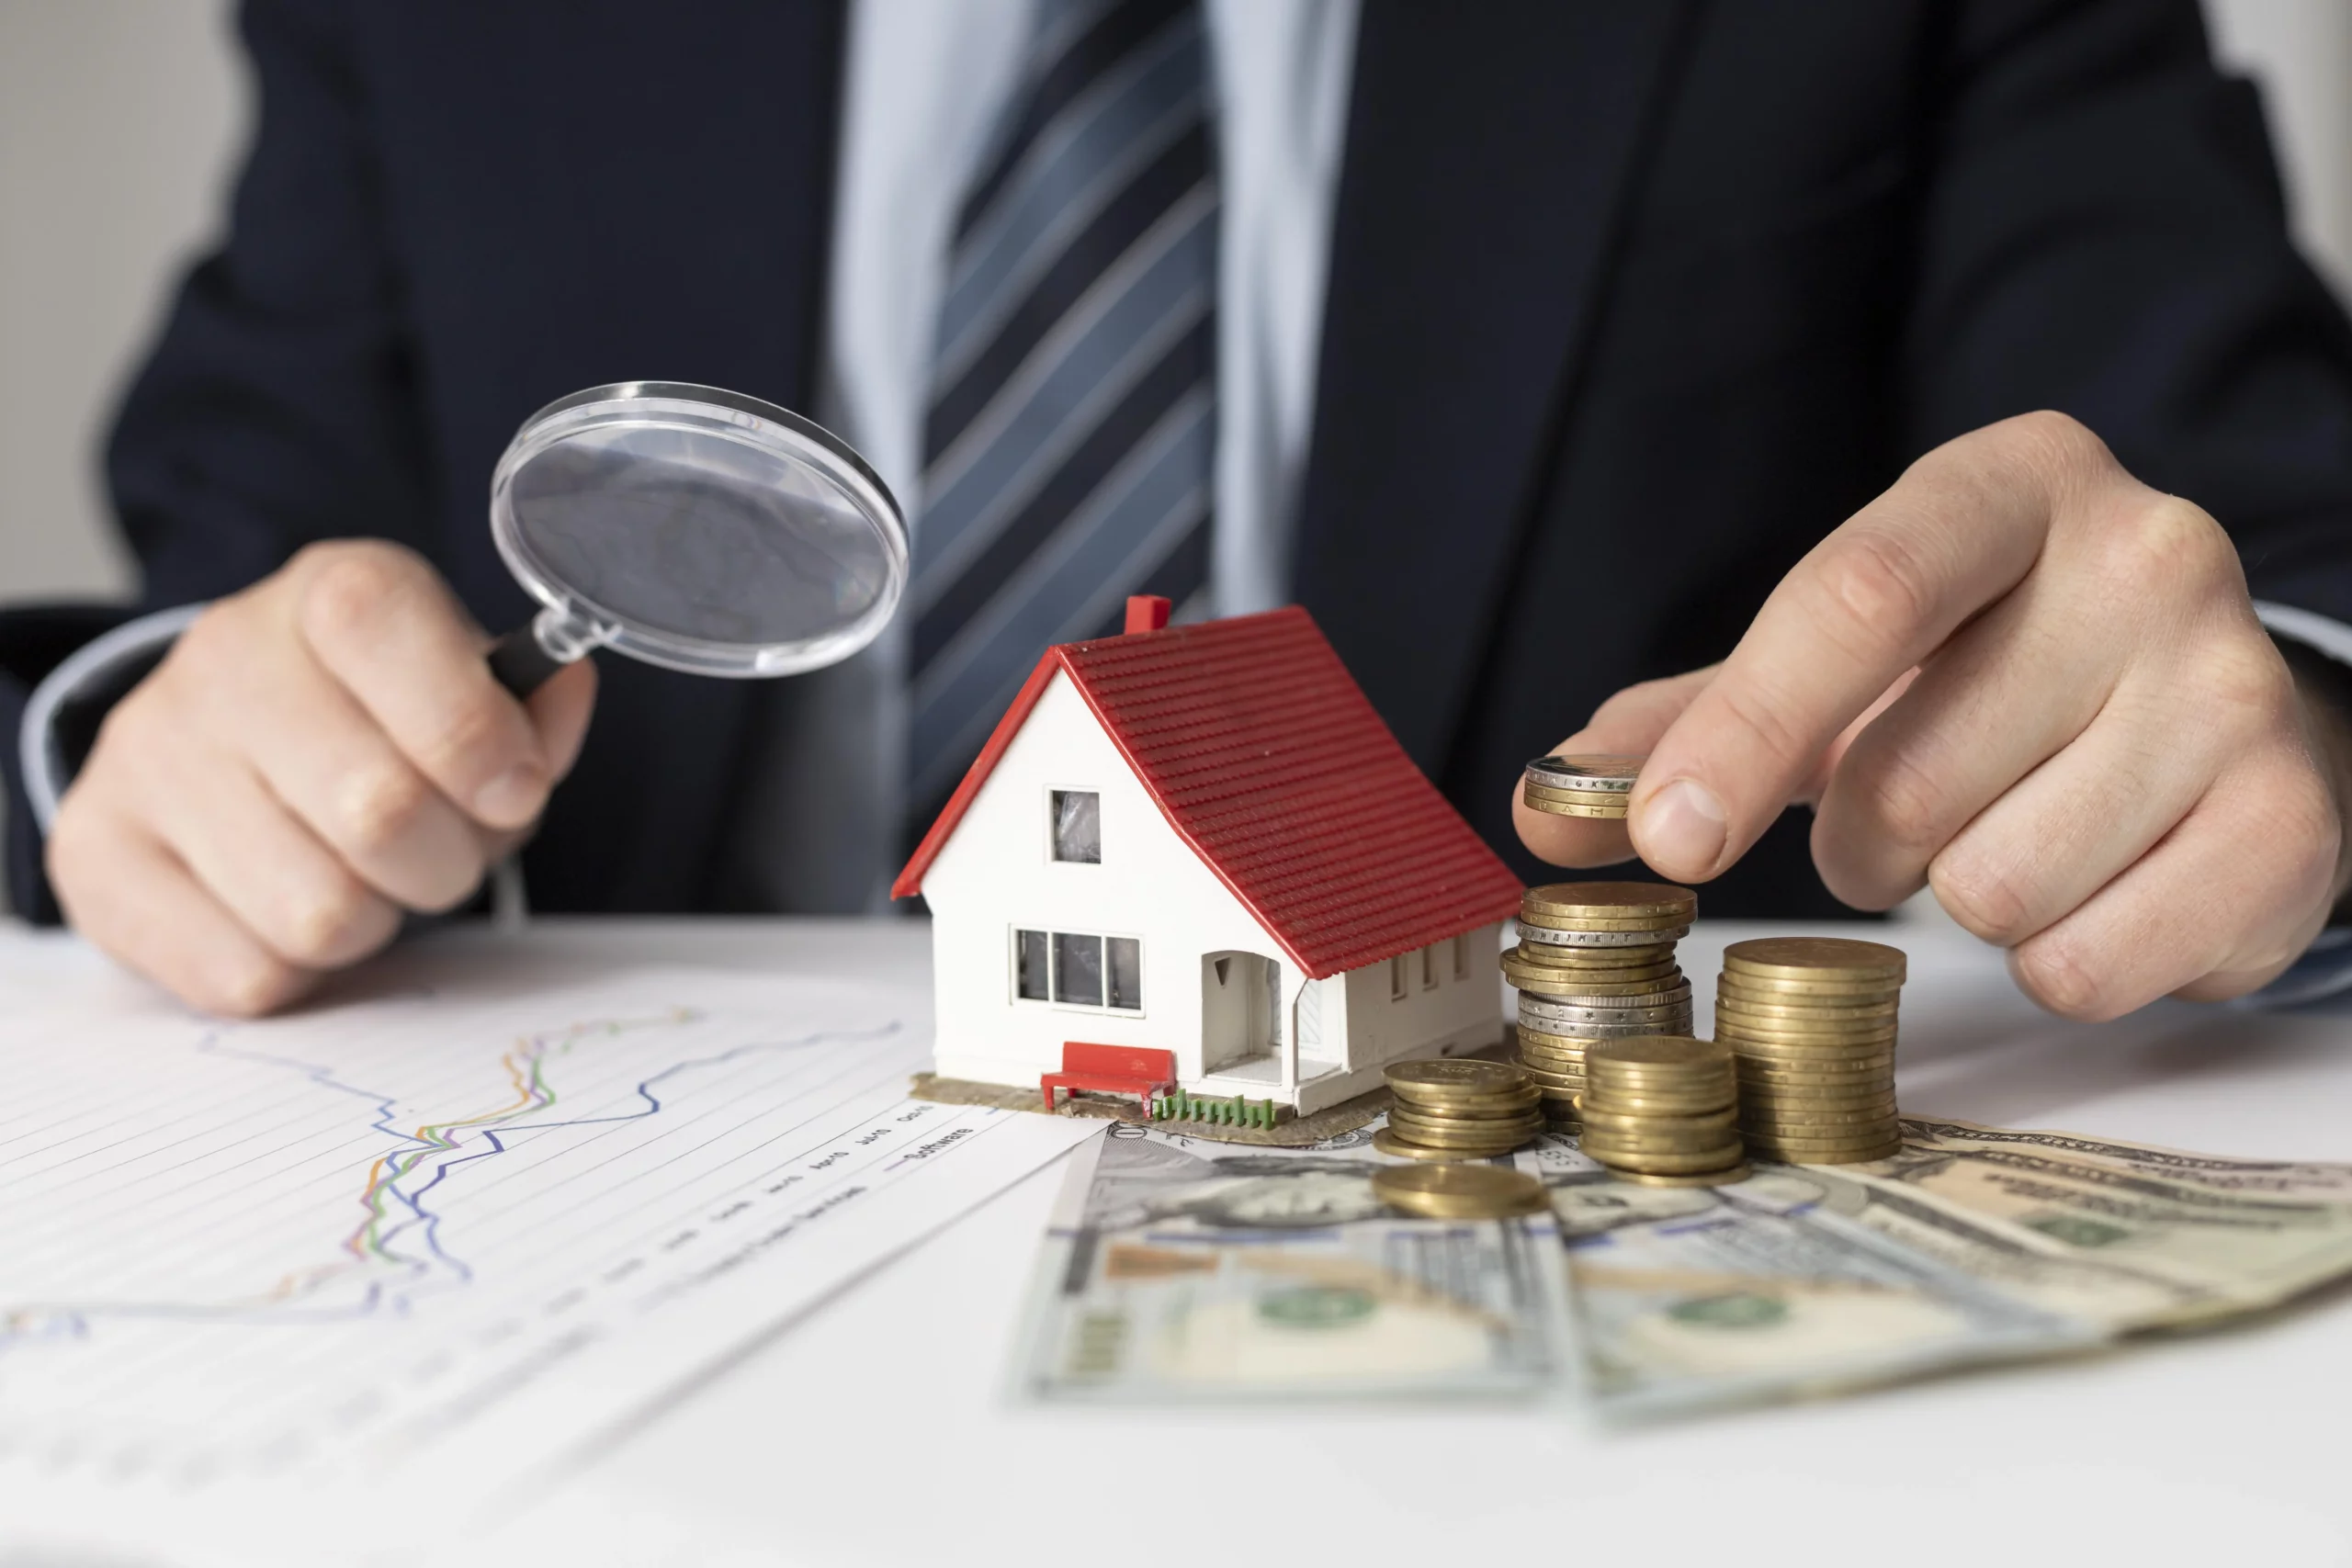 How to Get a Loan Against Property: A Step-by-Step Guide